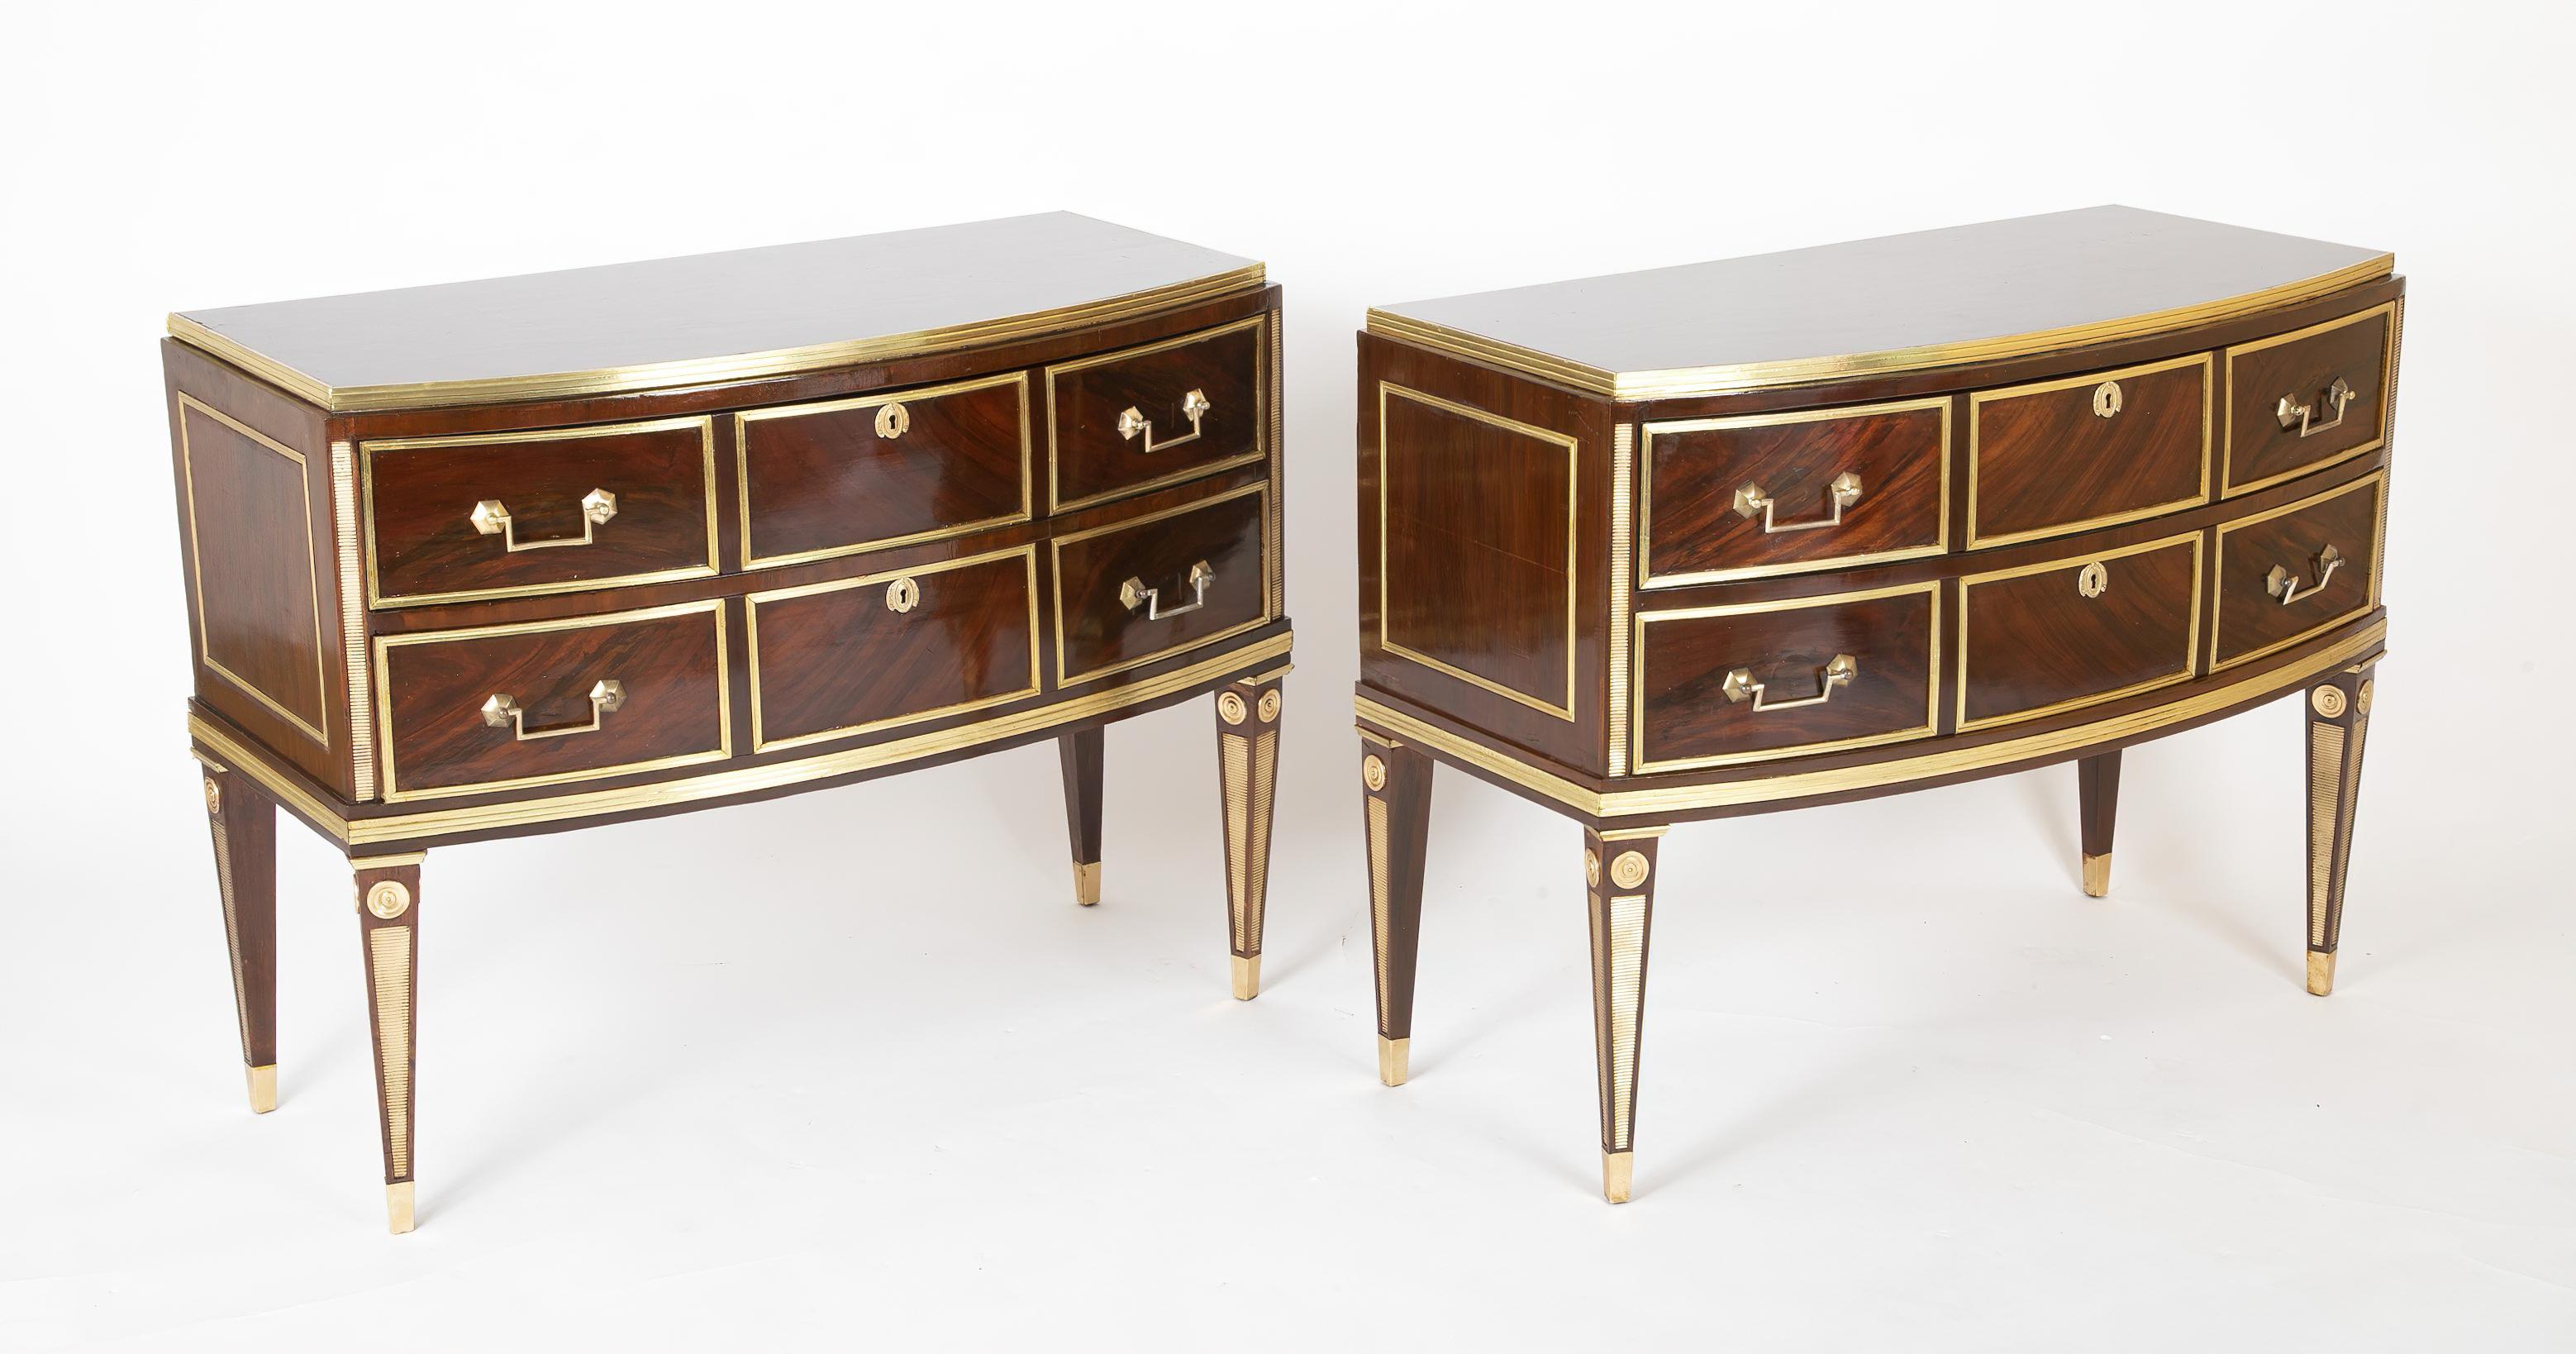 Neoclassical Pair of Russian Neoclassic Commodes